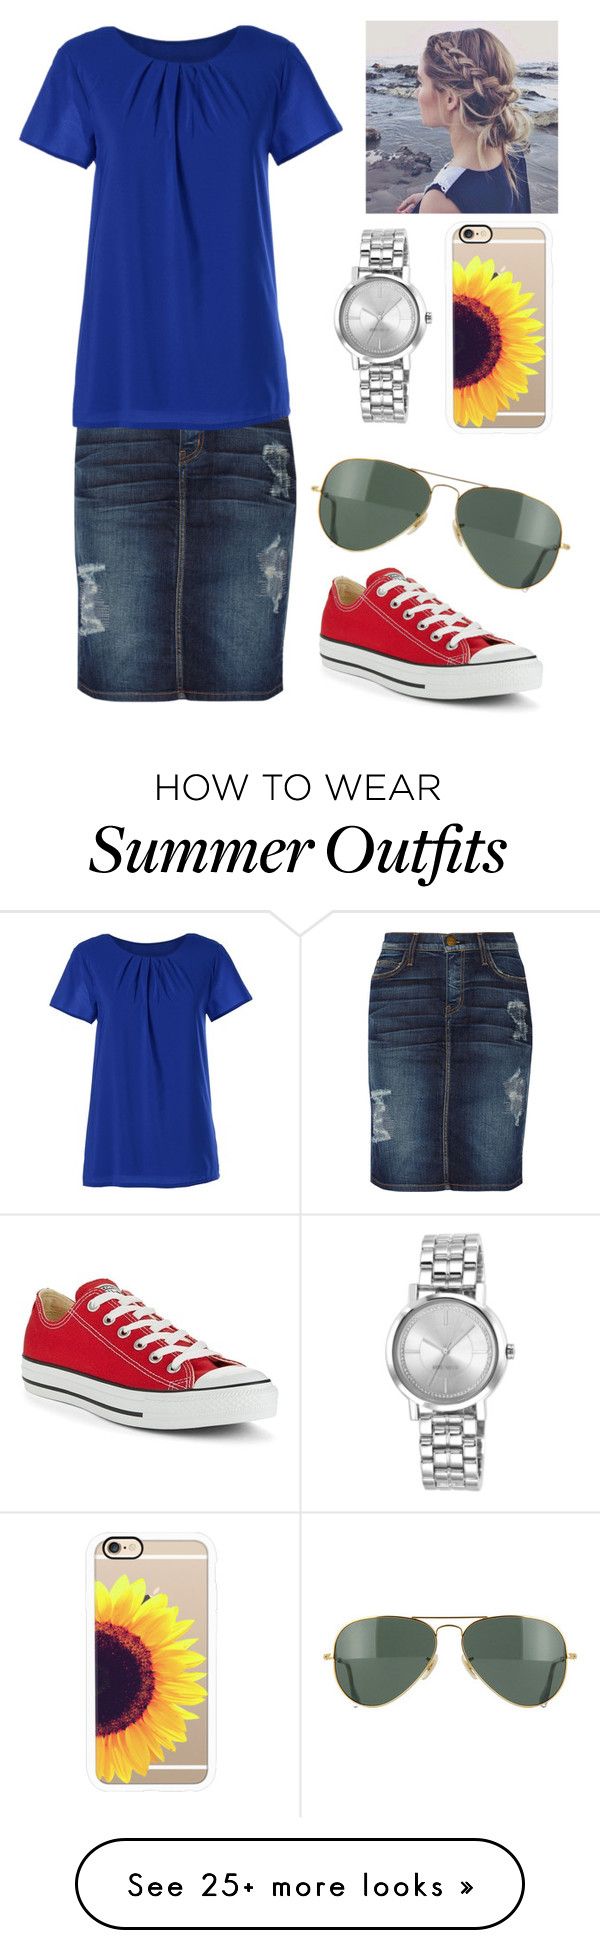 "Funny story behind this outfit " by jen1301 on Polyvore featuring Cur...